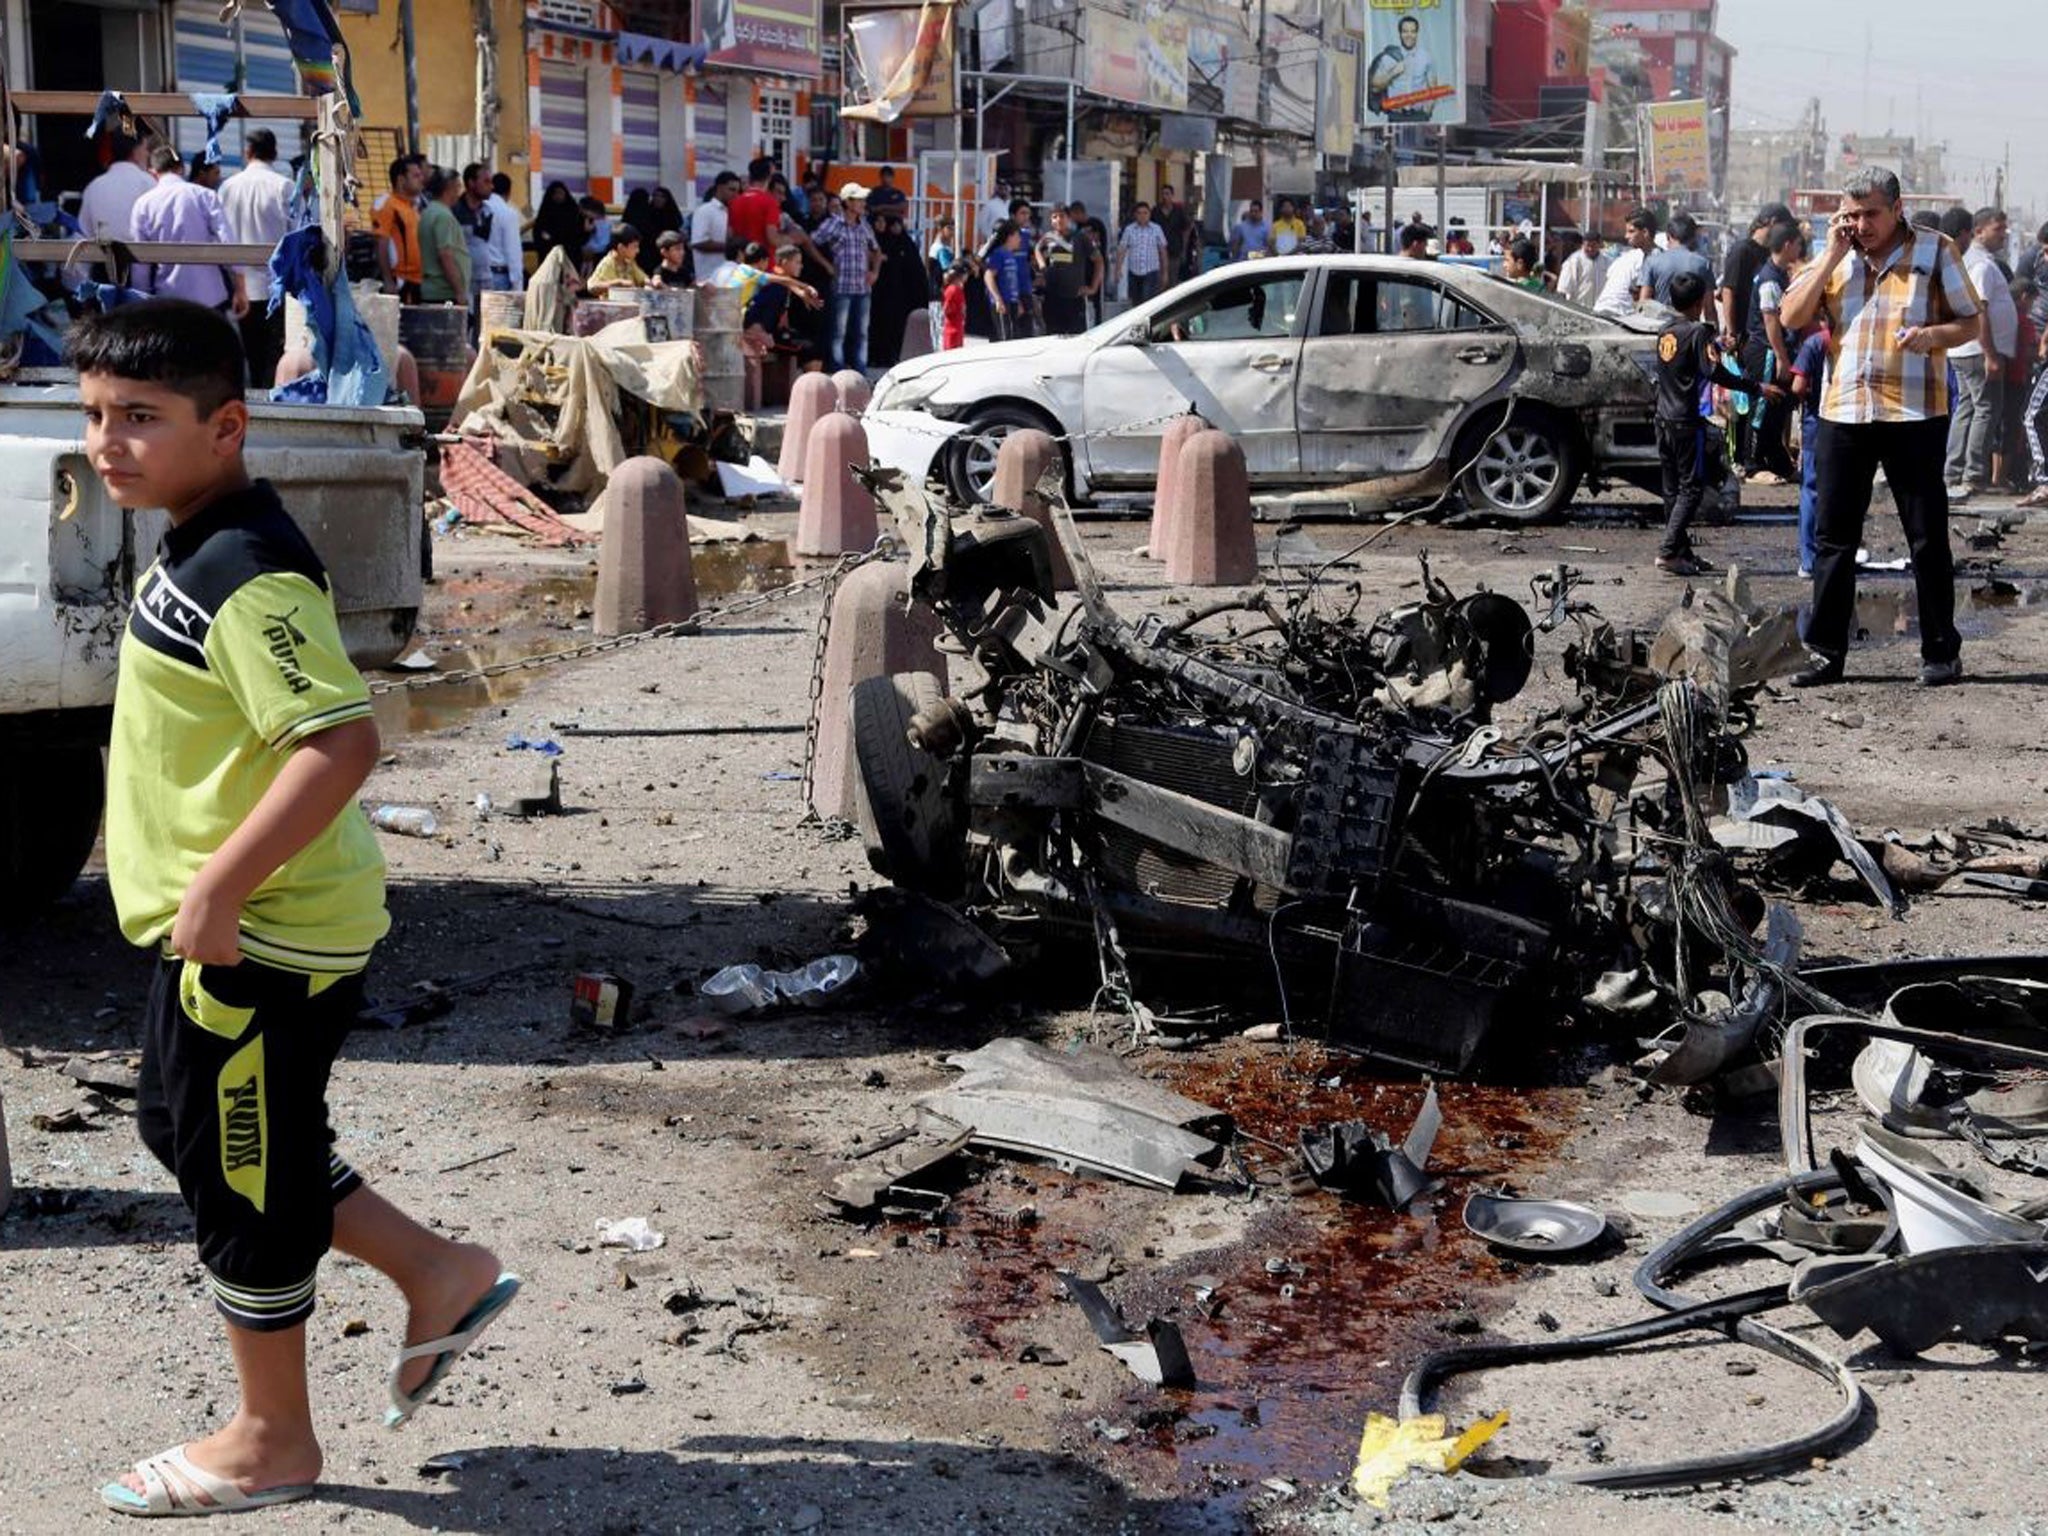 People inspect the site of a car bomb attack in Sadr City, Baghdad, as a co-ordinated wave of bombings tore through Shia Muslim areas in and around the Iraqi capital